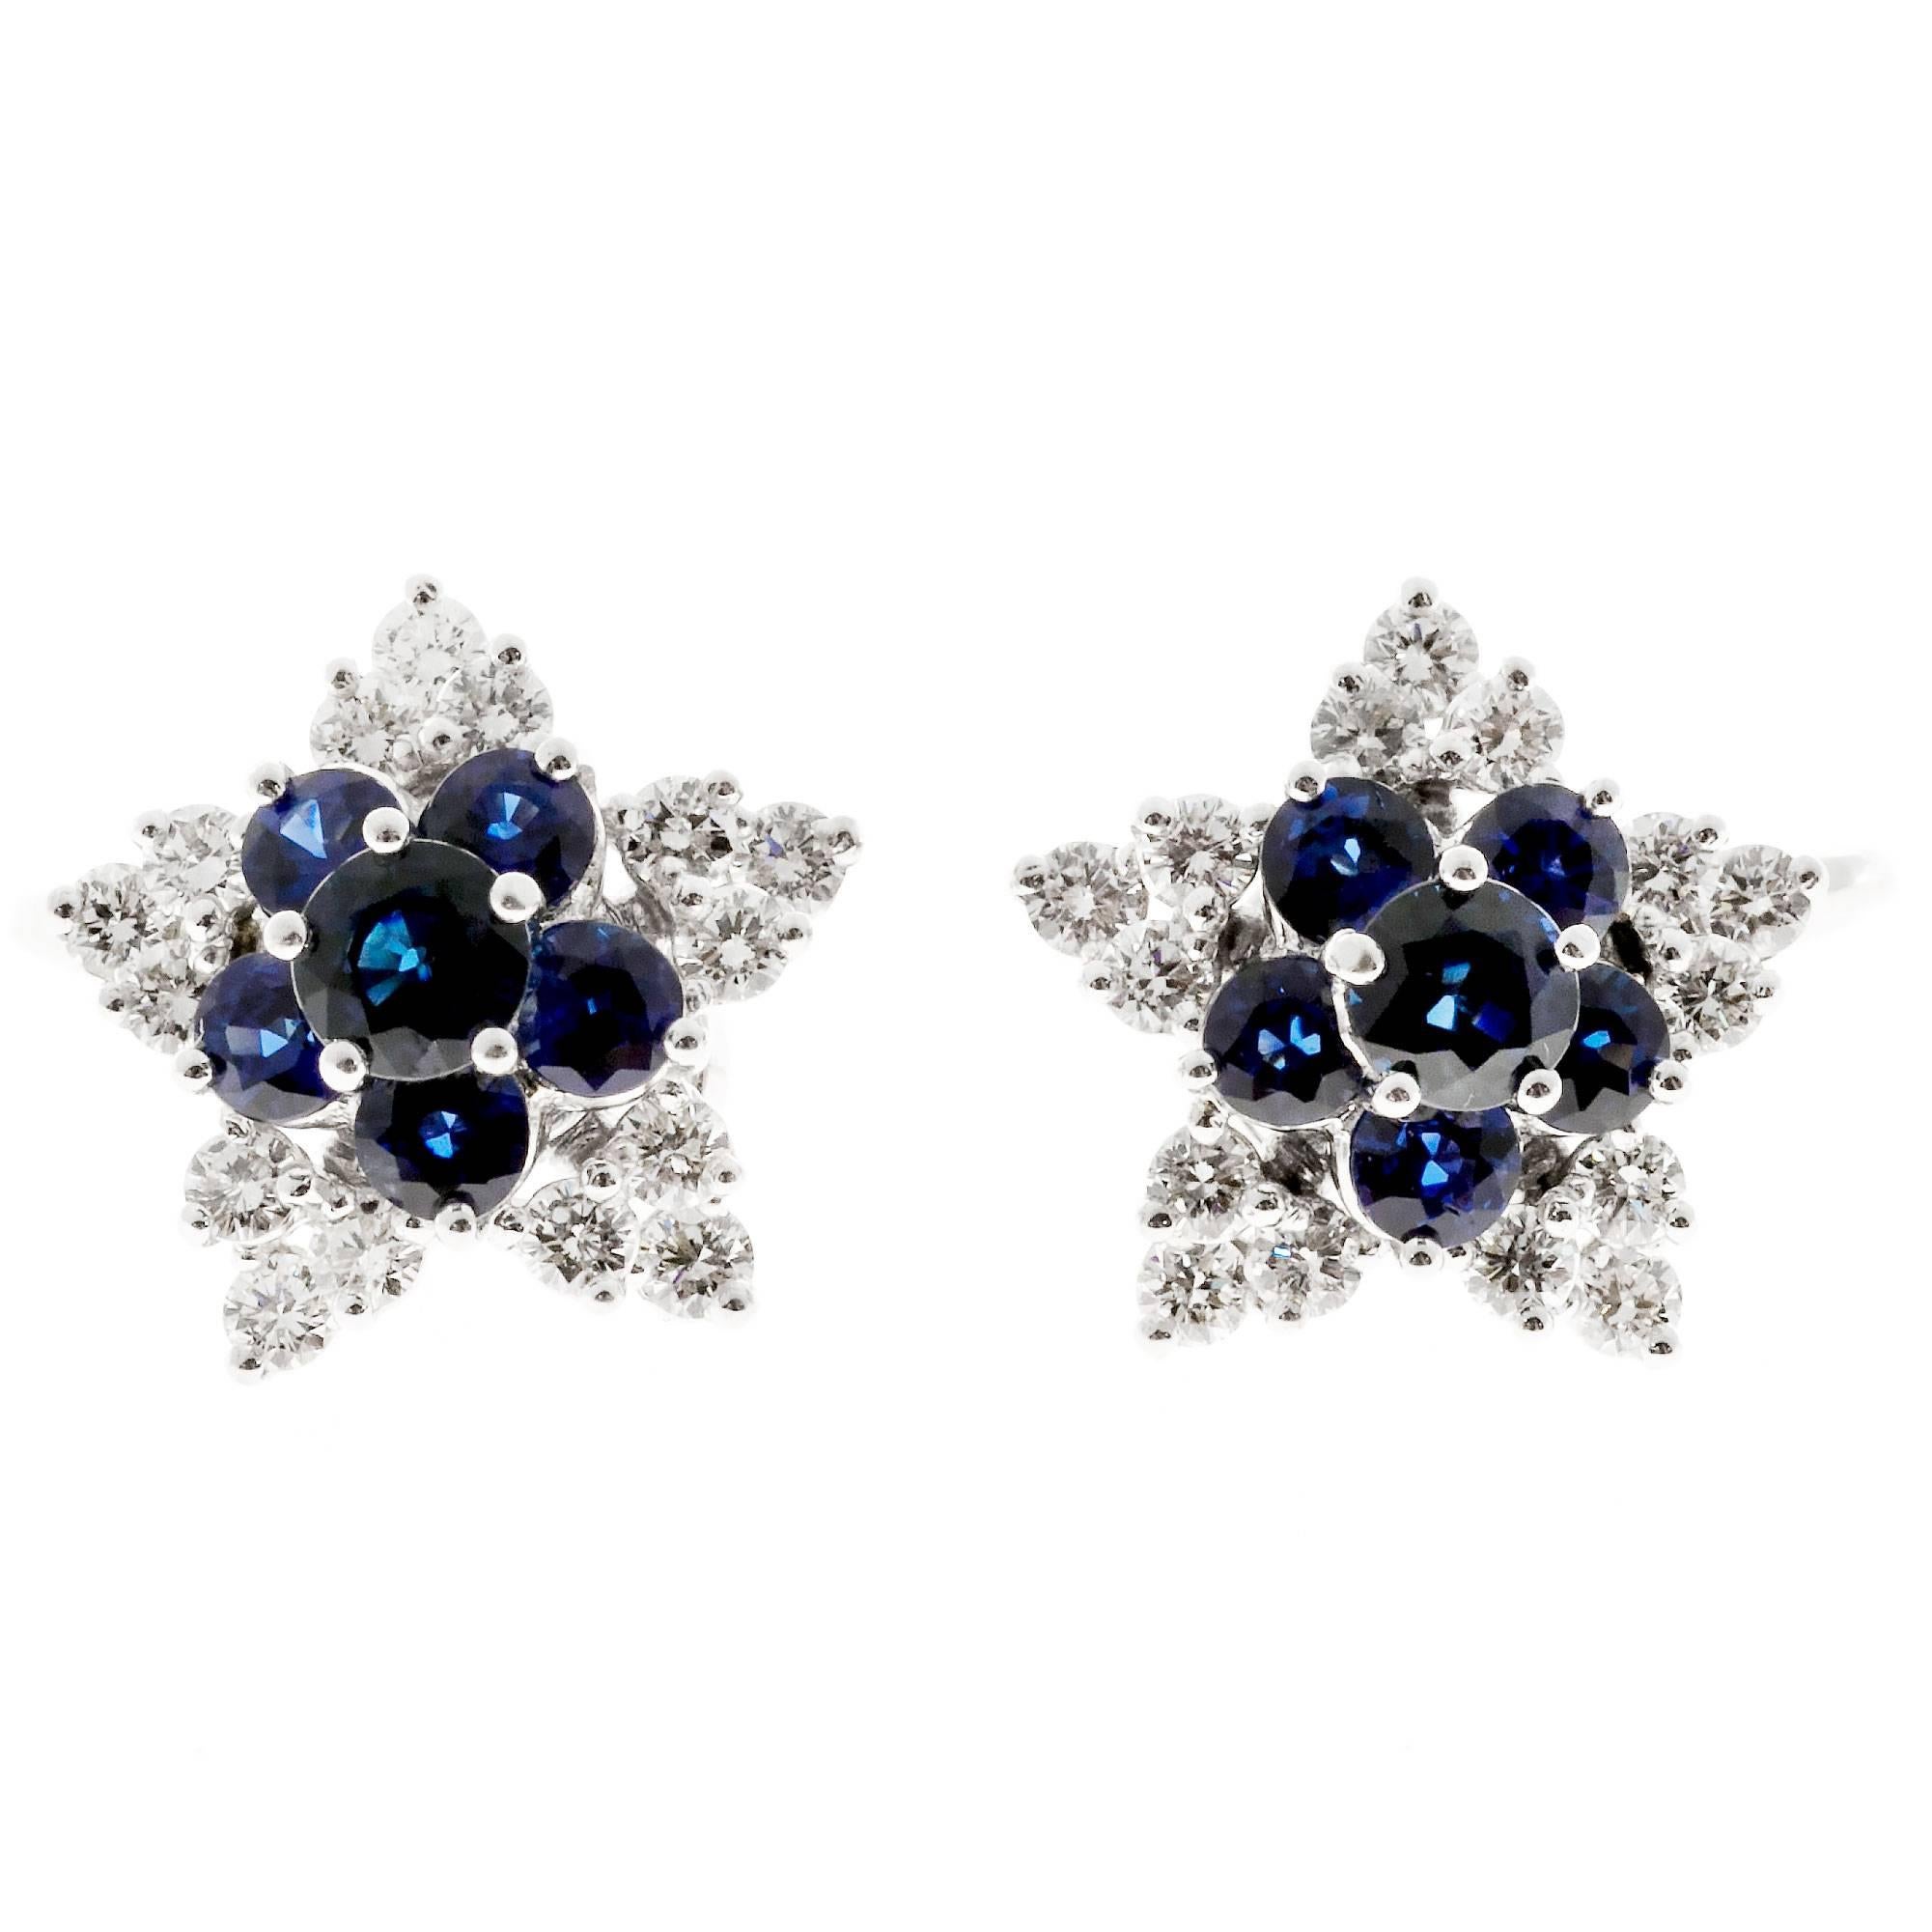 Domed clip post 18k white gold bright white Ideal cut diamond and top gem blue Sapphire earrings. GIA certificate # 5151581966

2 bright blue round Sapphires, approx. total weight .82cts, 4.4mm natural color simple heat only.
30 Ideal full cut